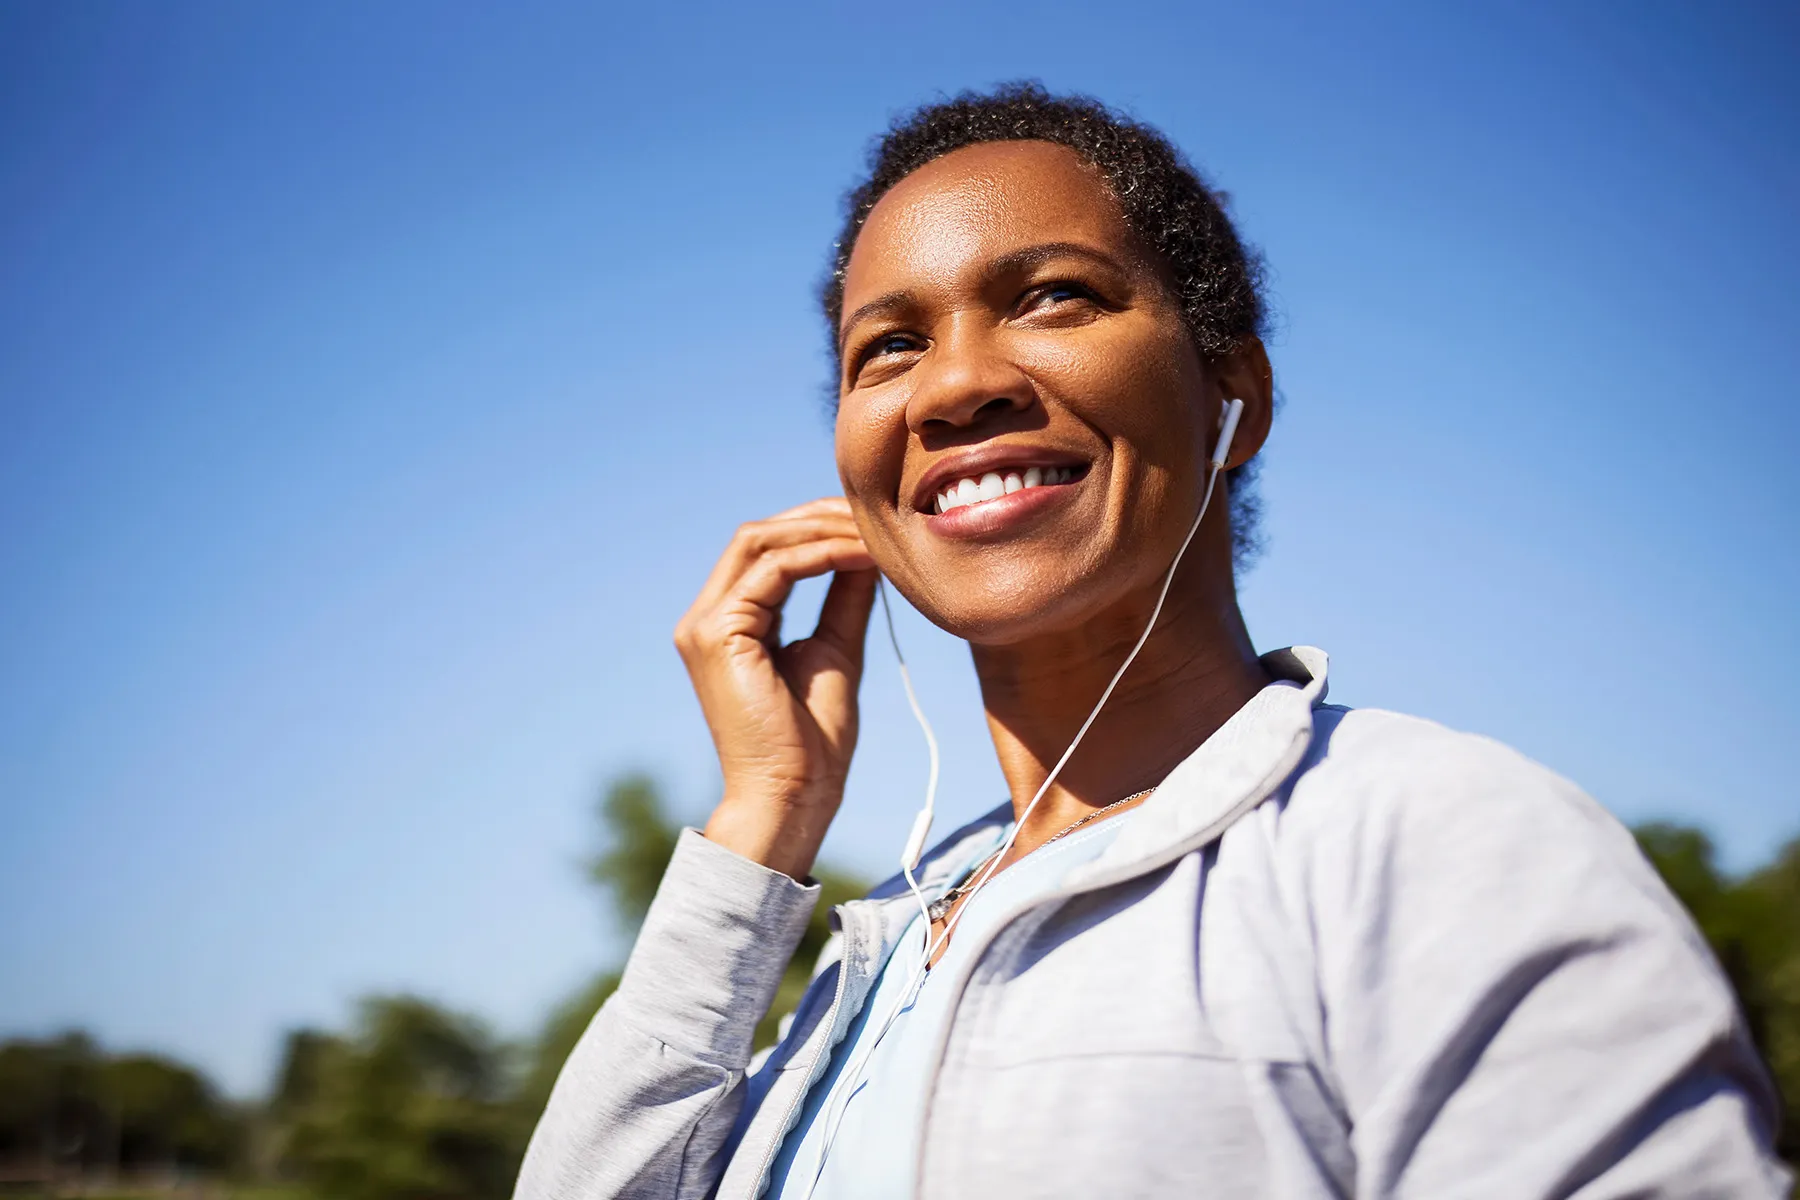 photo of listening to music while on walk